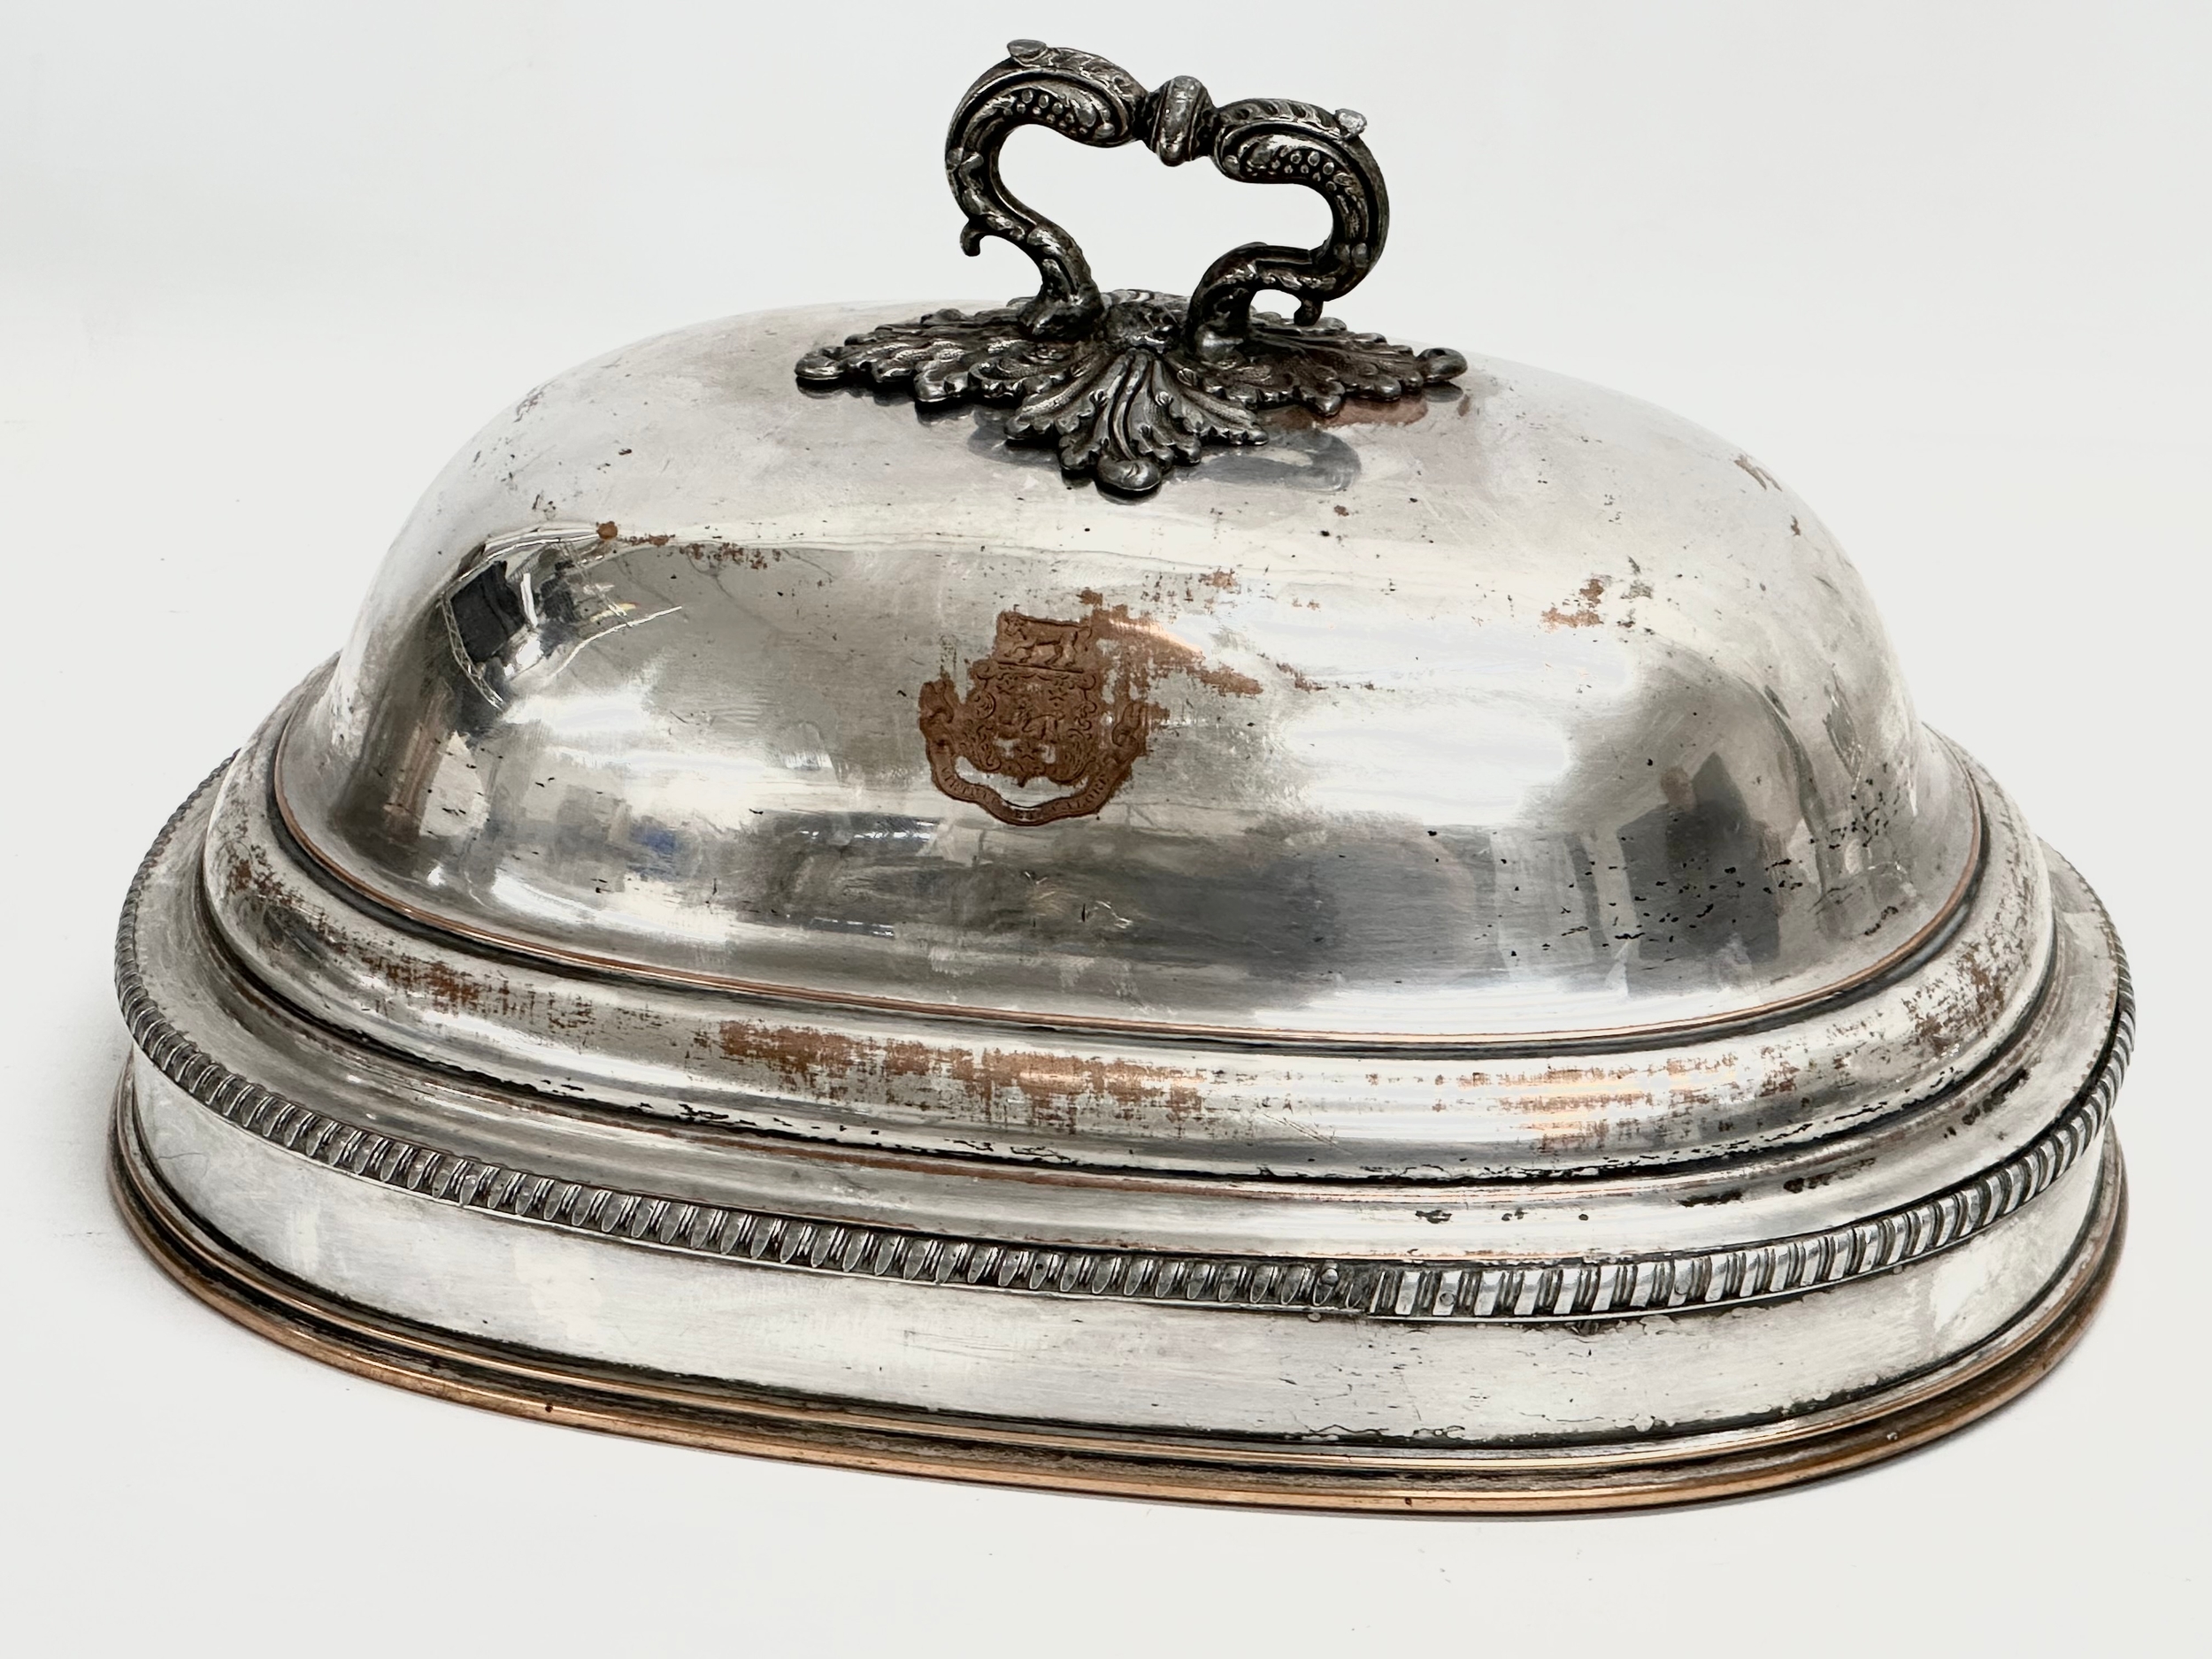 An Early 19th Century silver plated meat dome by D&G Holy & Co. Circa 1805-1820. 34x25x20cm